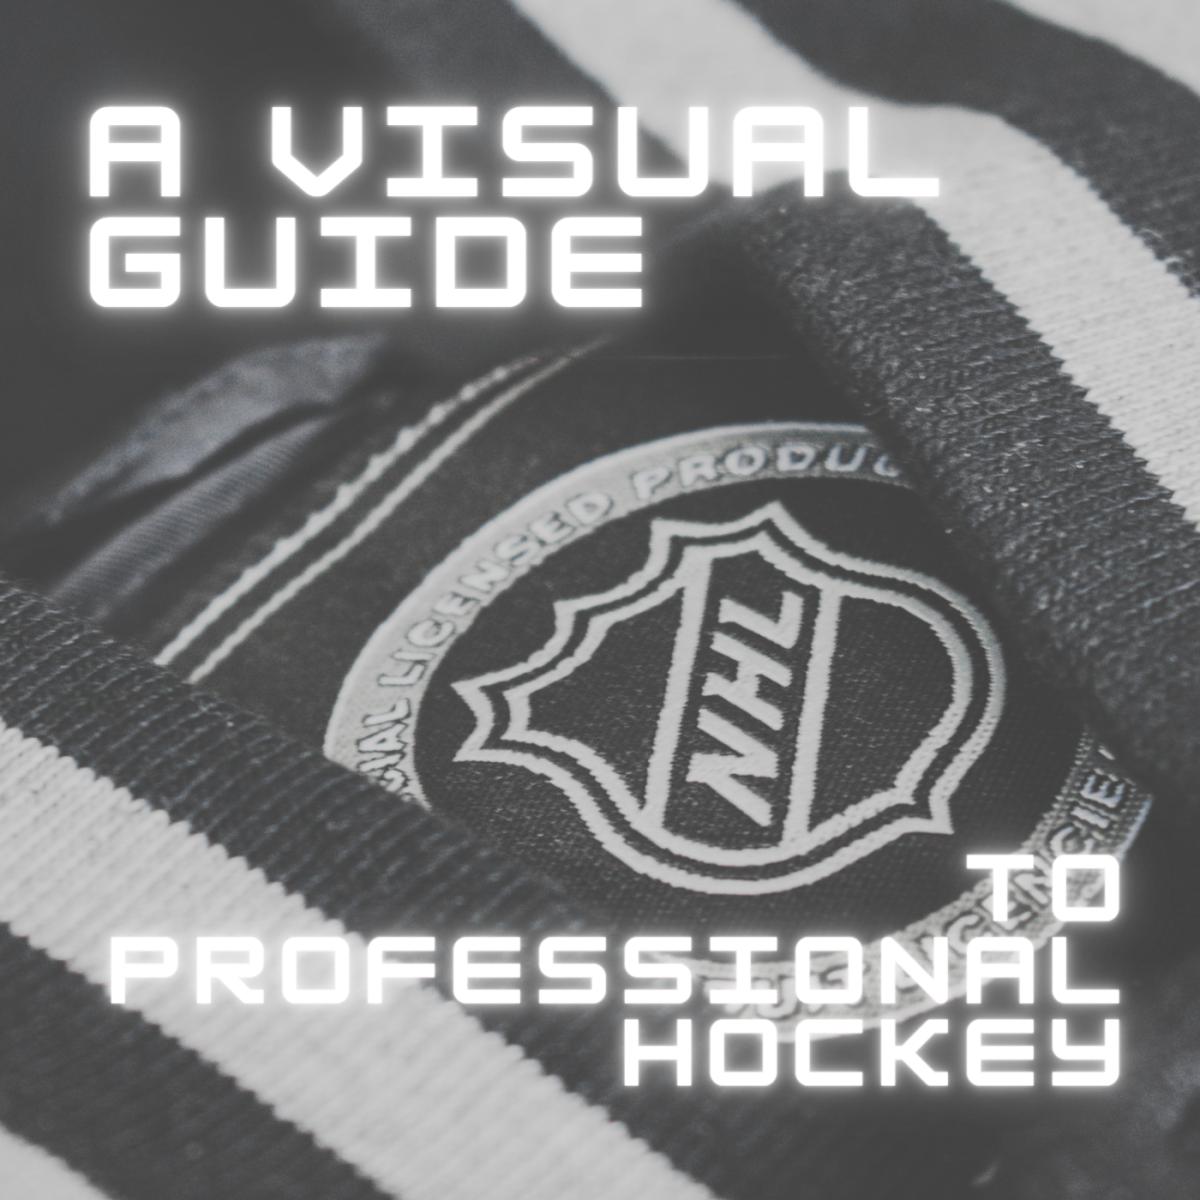 This guide provides information on everything from penalties to stoppages.